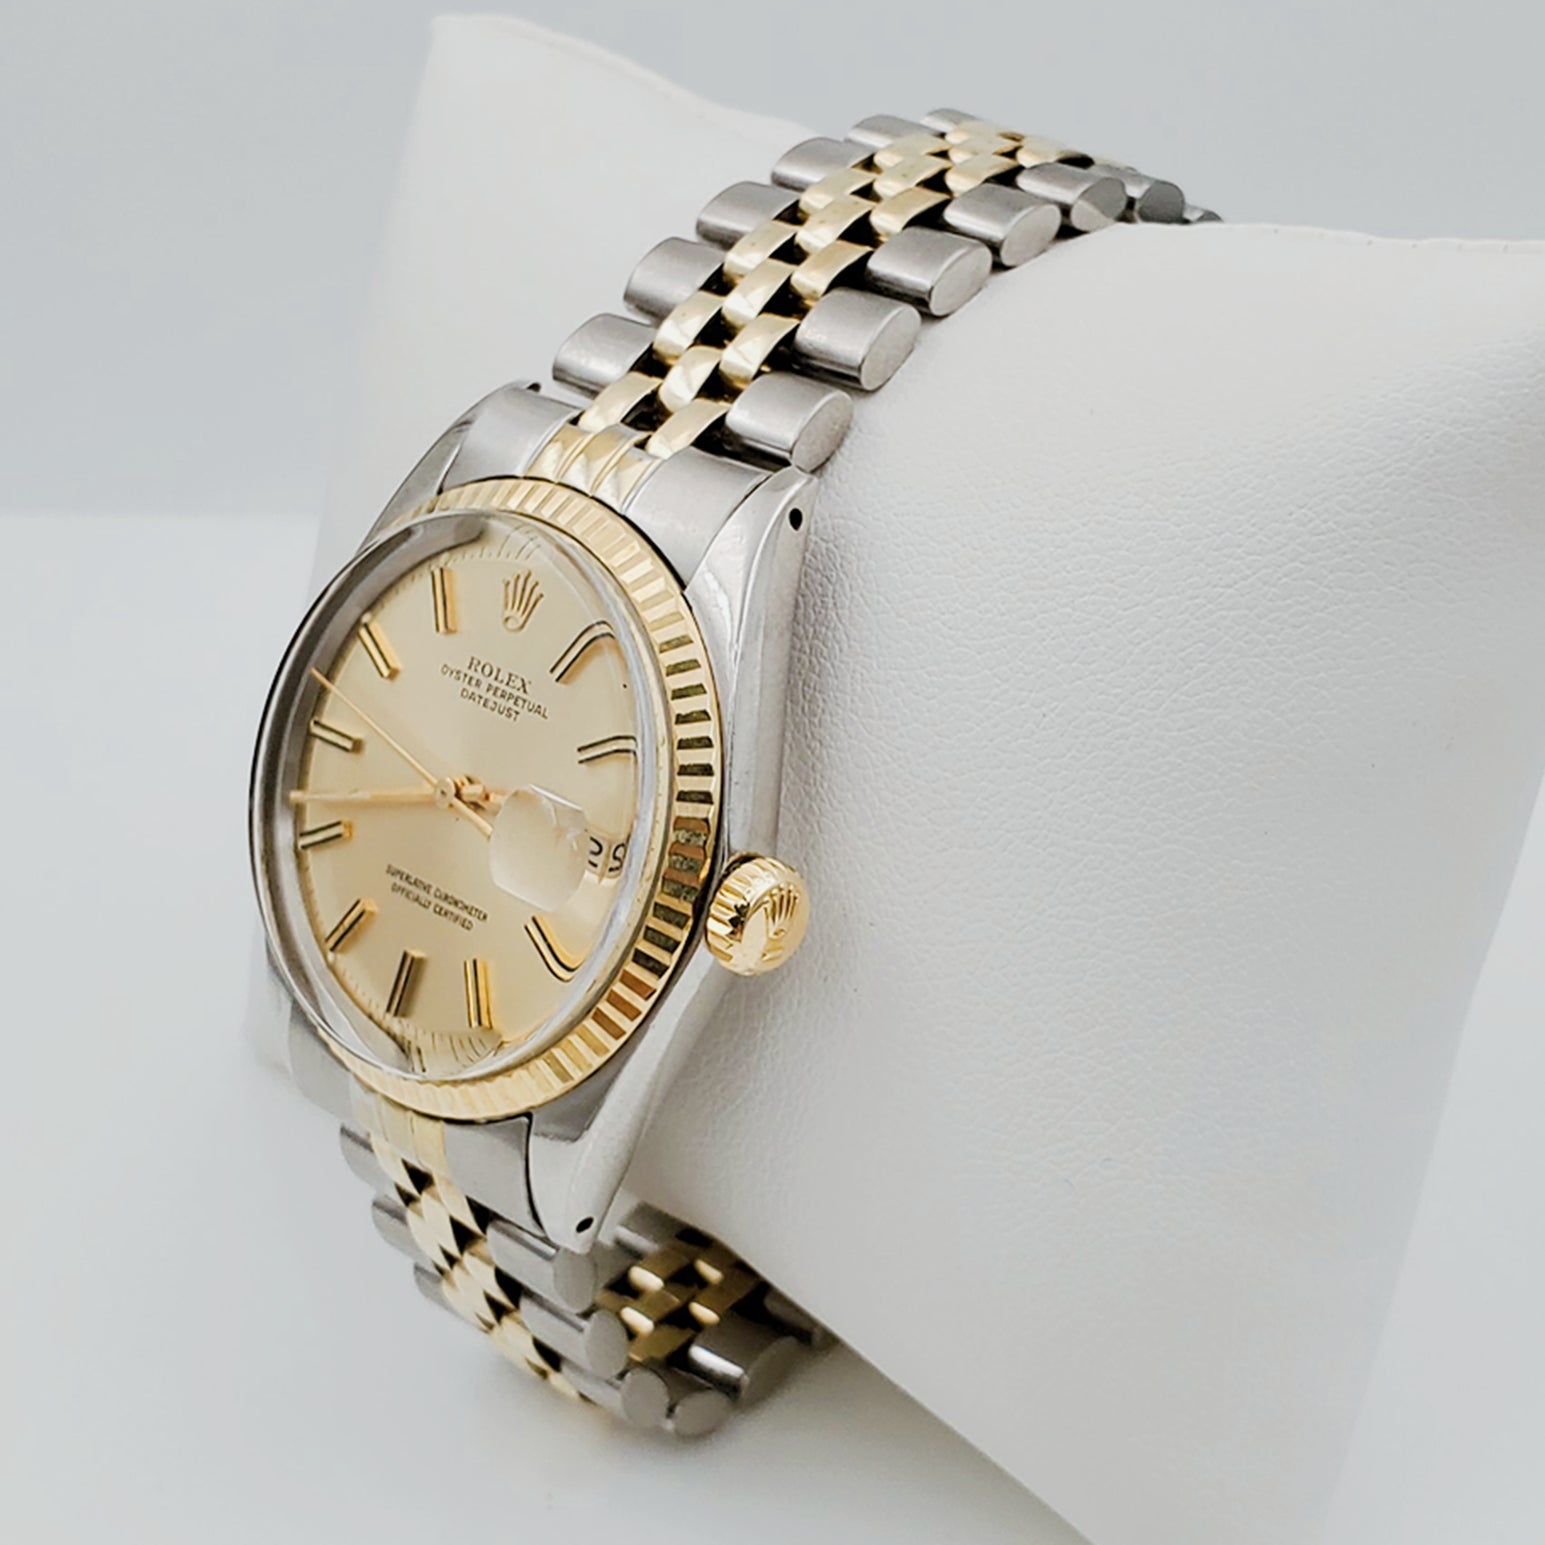 Men's Rolex 36mm DateJust 18k Gold / Stainless Steel Two-Tone Watch with Fluted Bezel and Champaign Dial. (Pre-Owned)